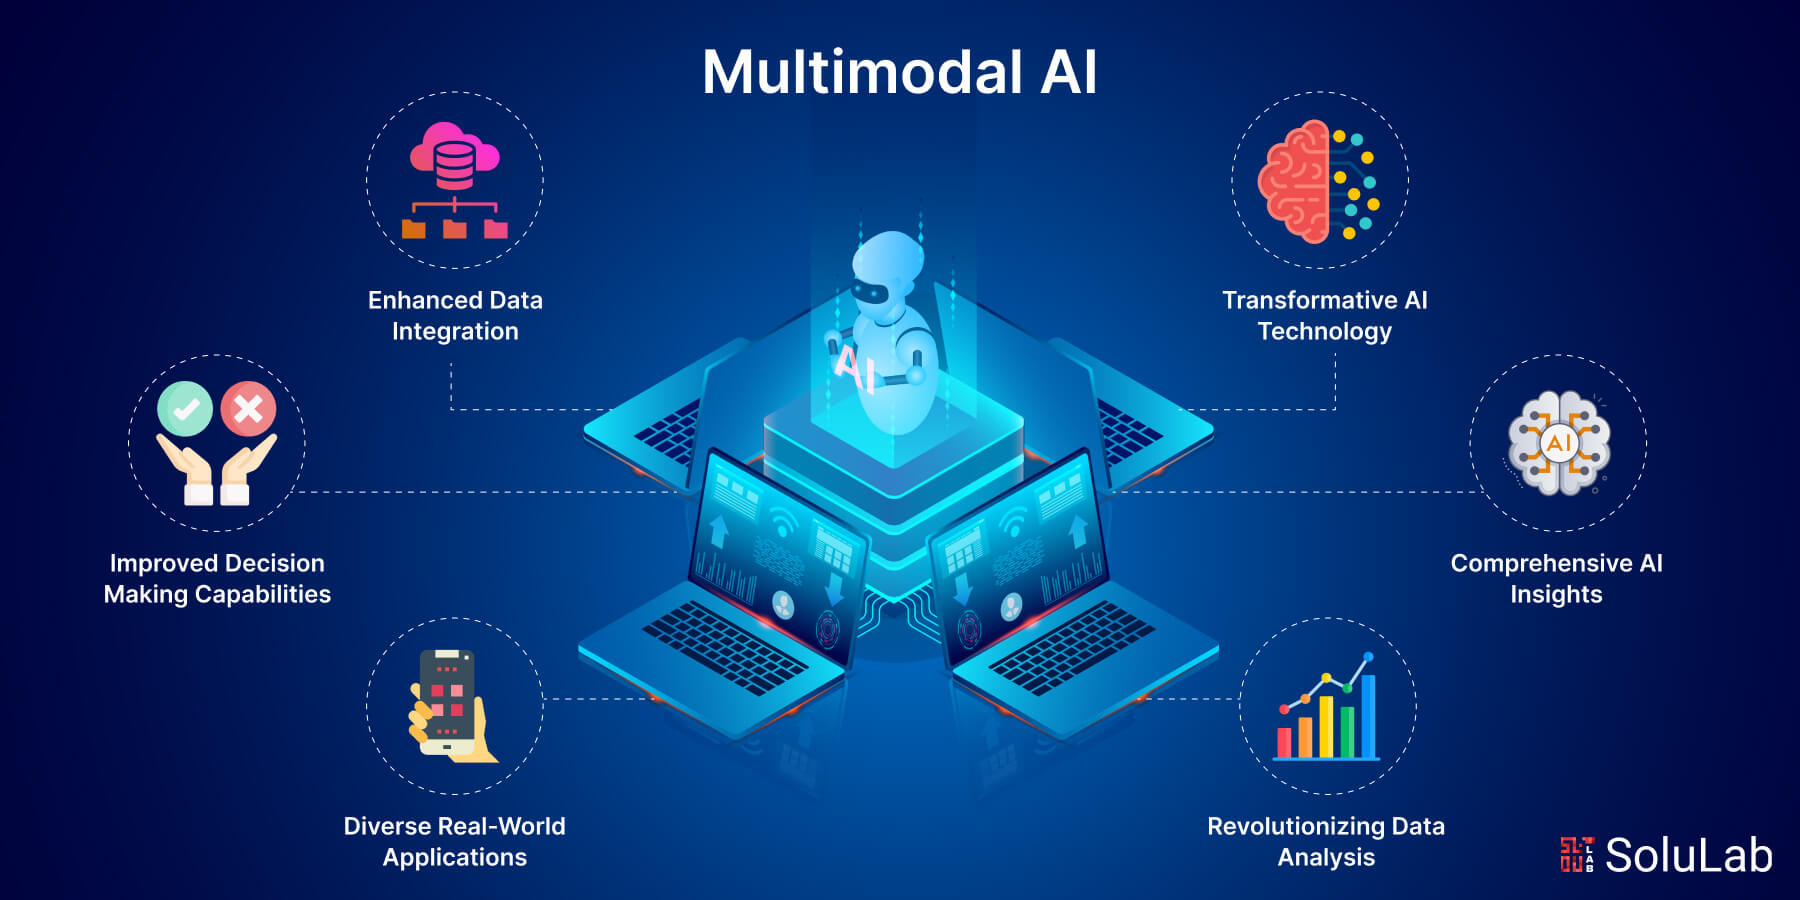 Guide to Multimodal AI